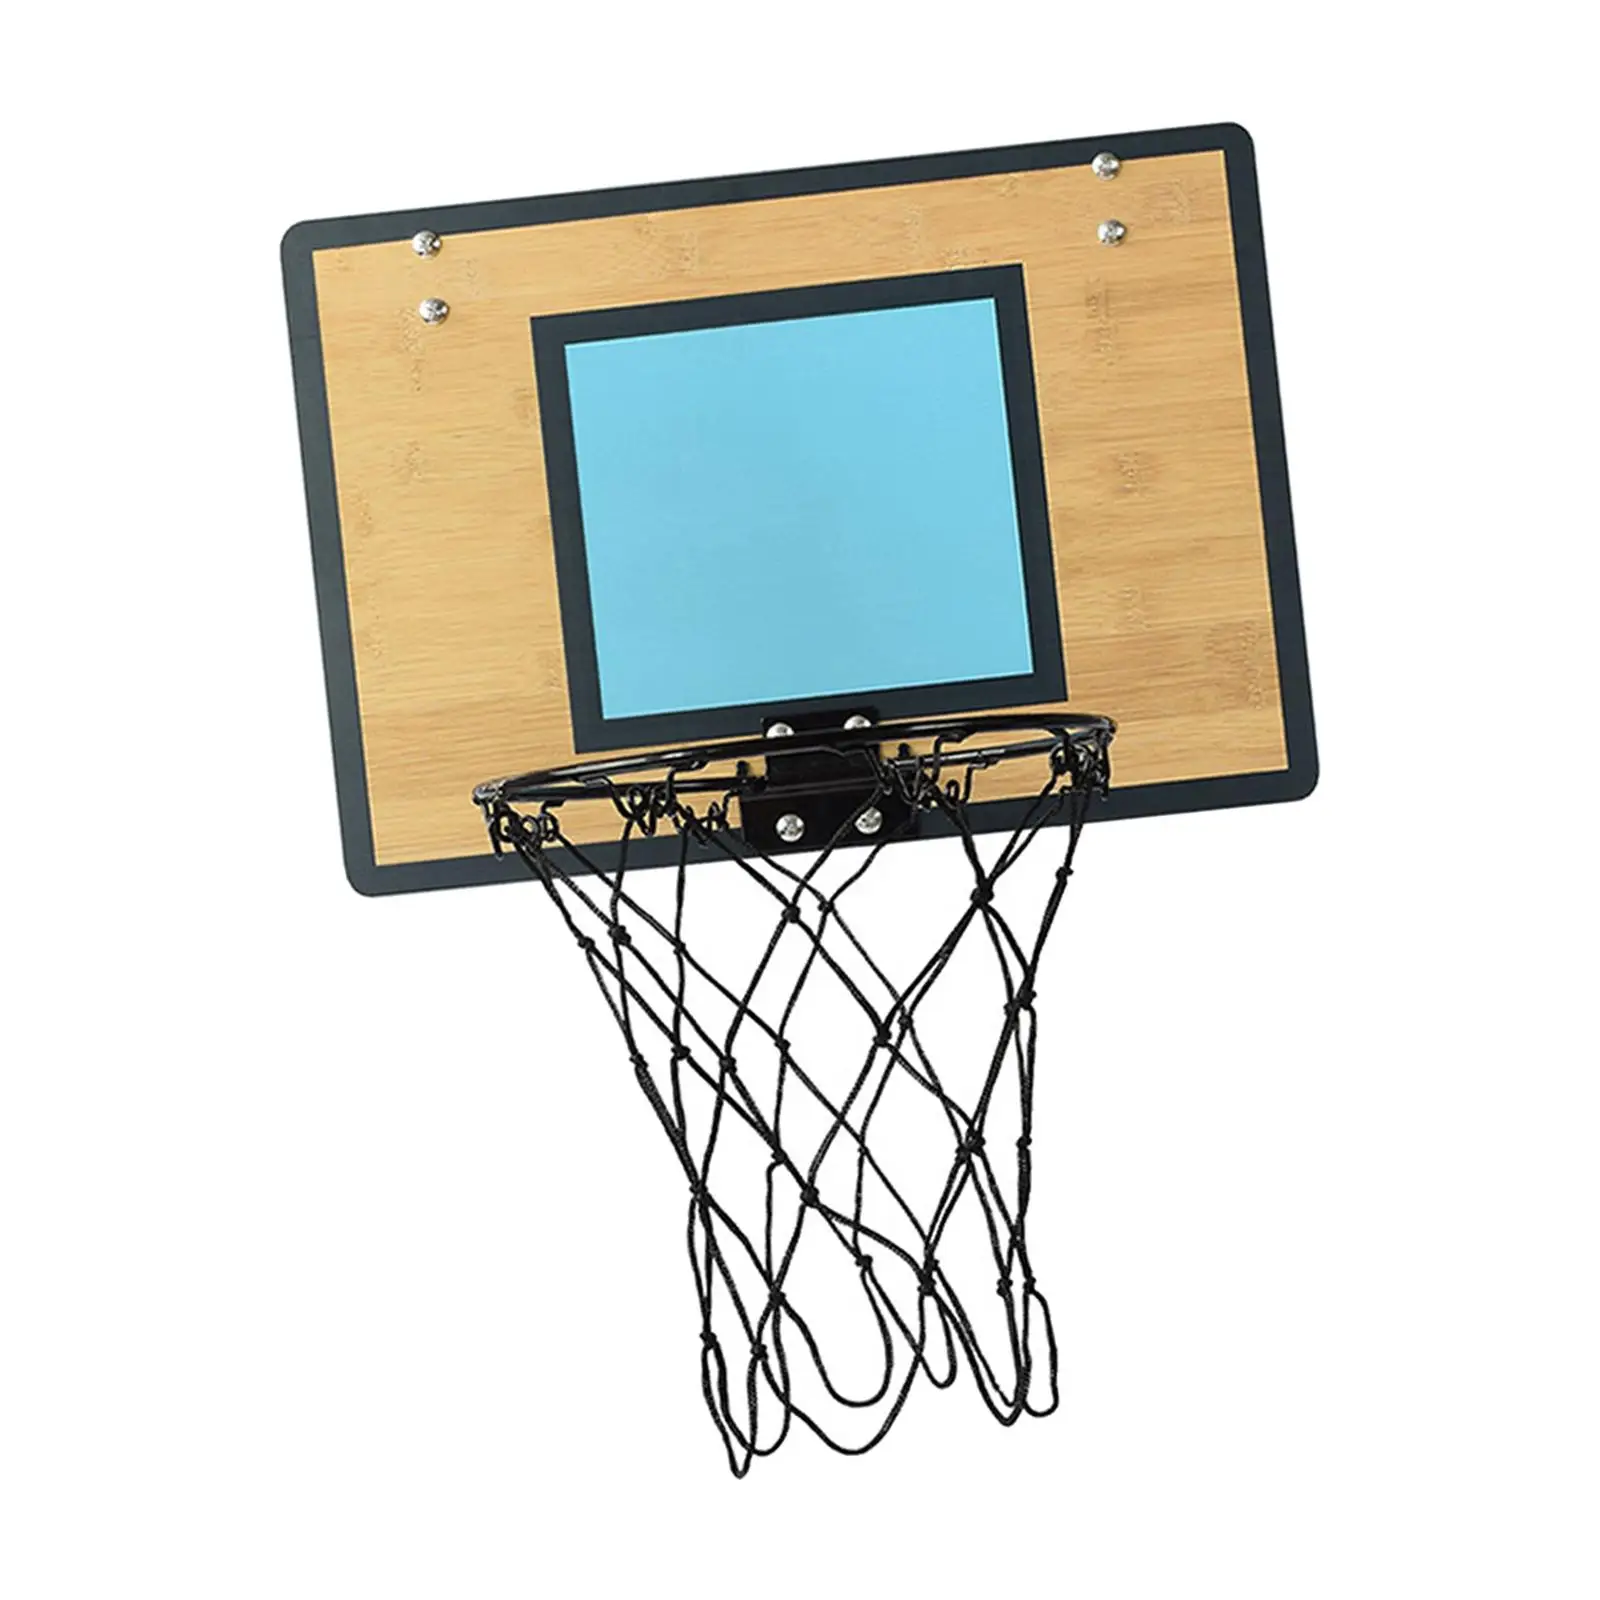 Mini Basketball Hoop over The Door Bamboo Backboard Basketball Goal Basketball Game Toy for Room Office Gifts for Kids Teens